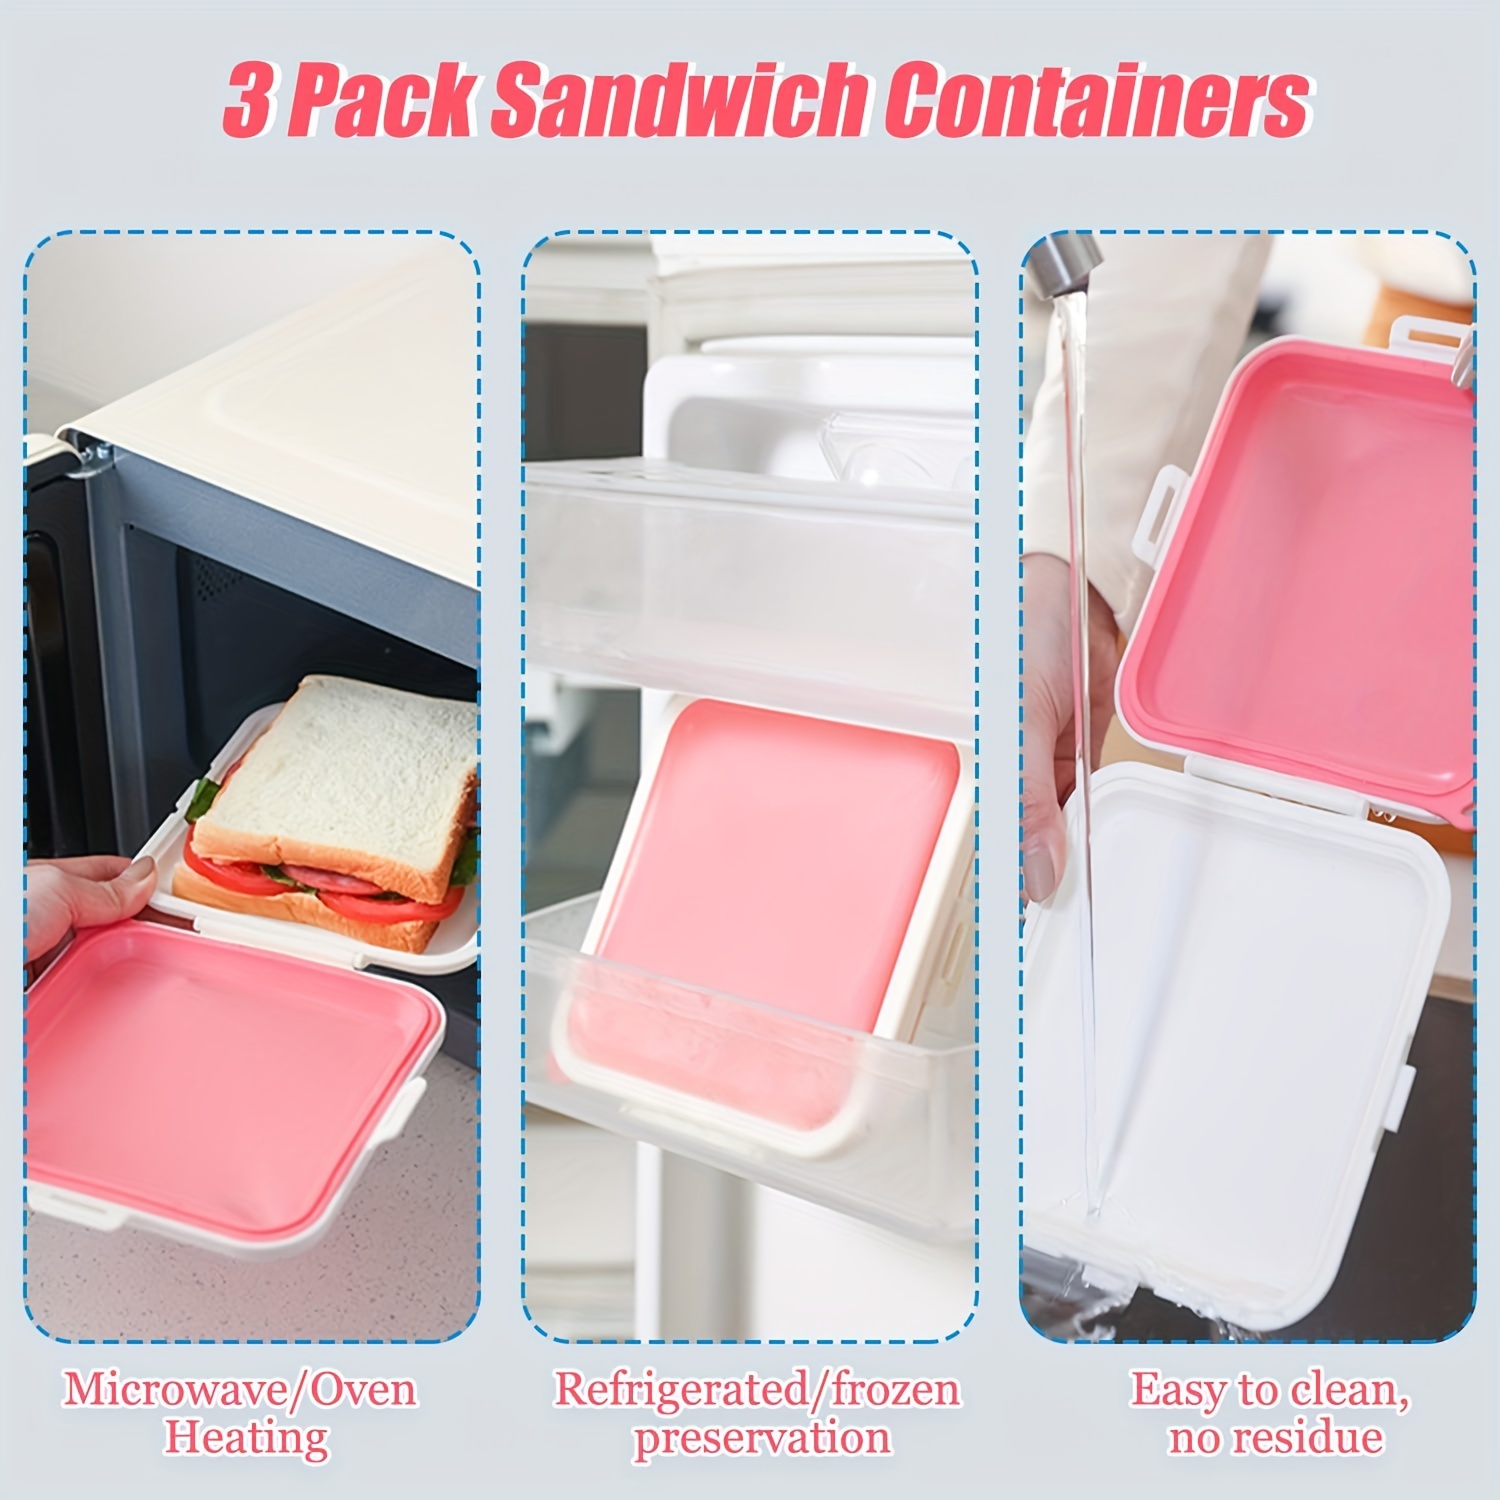 Sandwich Container, Toast-shaped Lunch Box Storage Container With Lid,  Bpa-free And Reusable, Microwave And Dishwasher Safe, For Home Or Adult Use  (colorful)